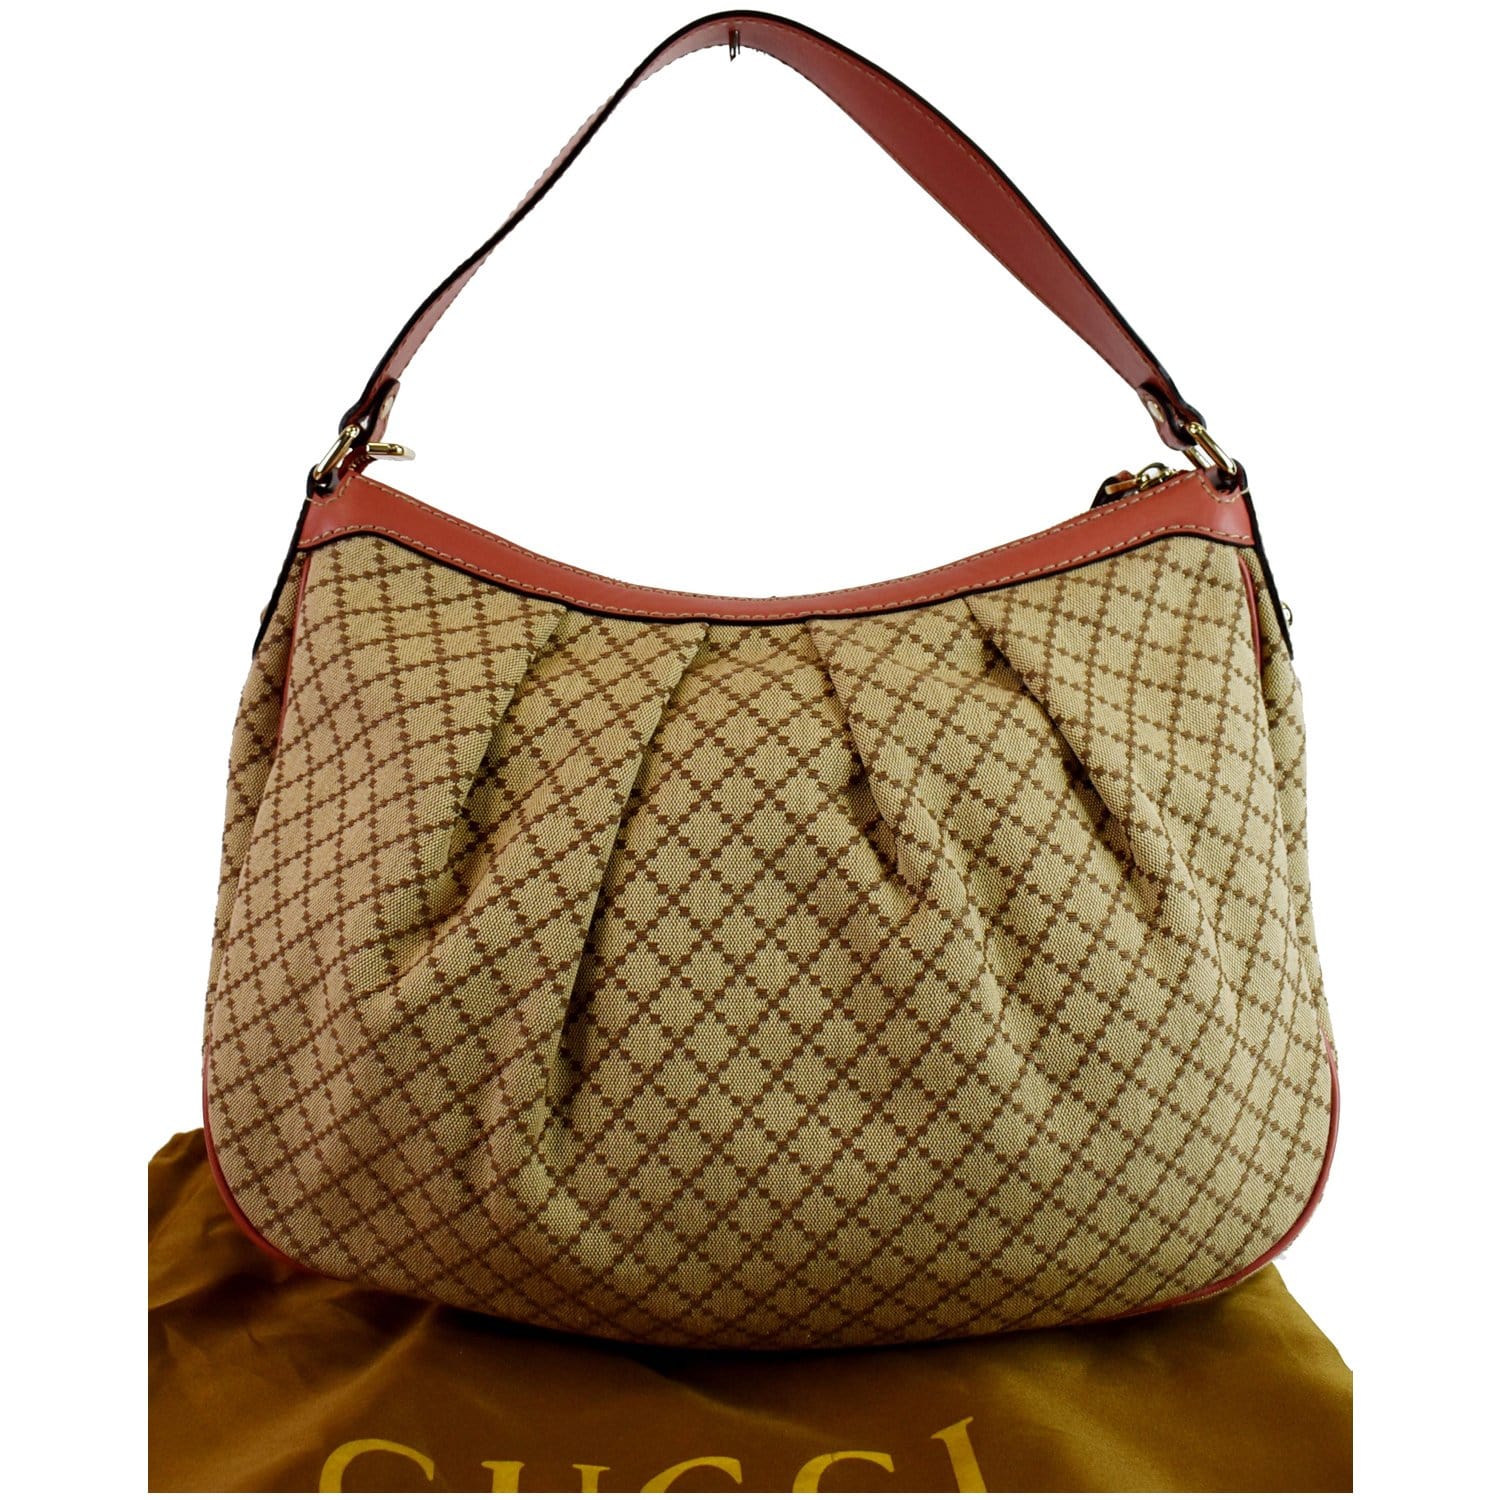 Sold at Auction: GUCCI 'SUKEY' MEDIUM IVORY GUCCISSIMA HOBO BAG